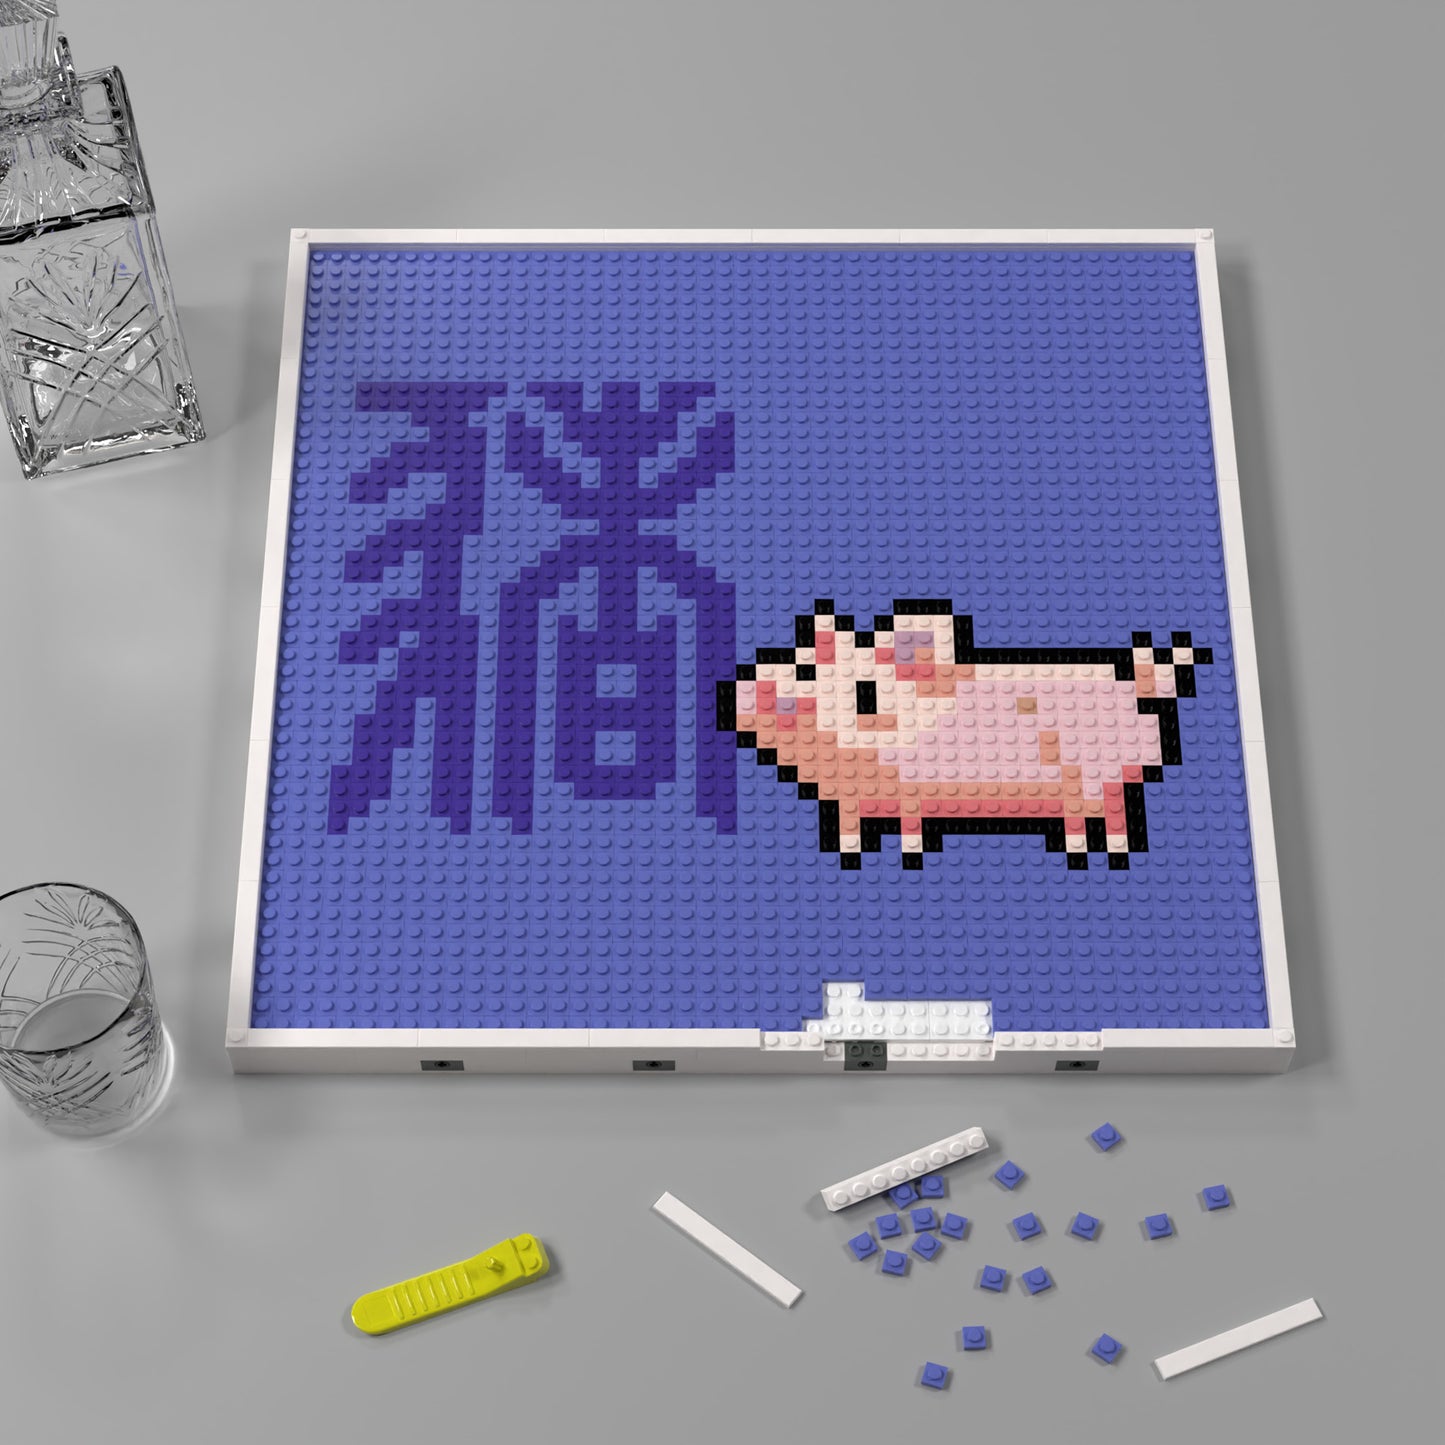 48*48 Dot Handmade Building Brick Pixel Art Chinese Zodiac Pig Compatible with LEGO Customized Chinese Traditional Culture Artwork Best Gift for Friends of Pig